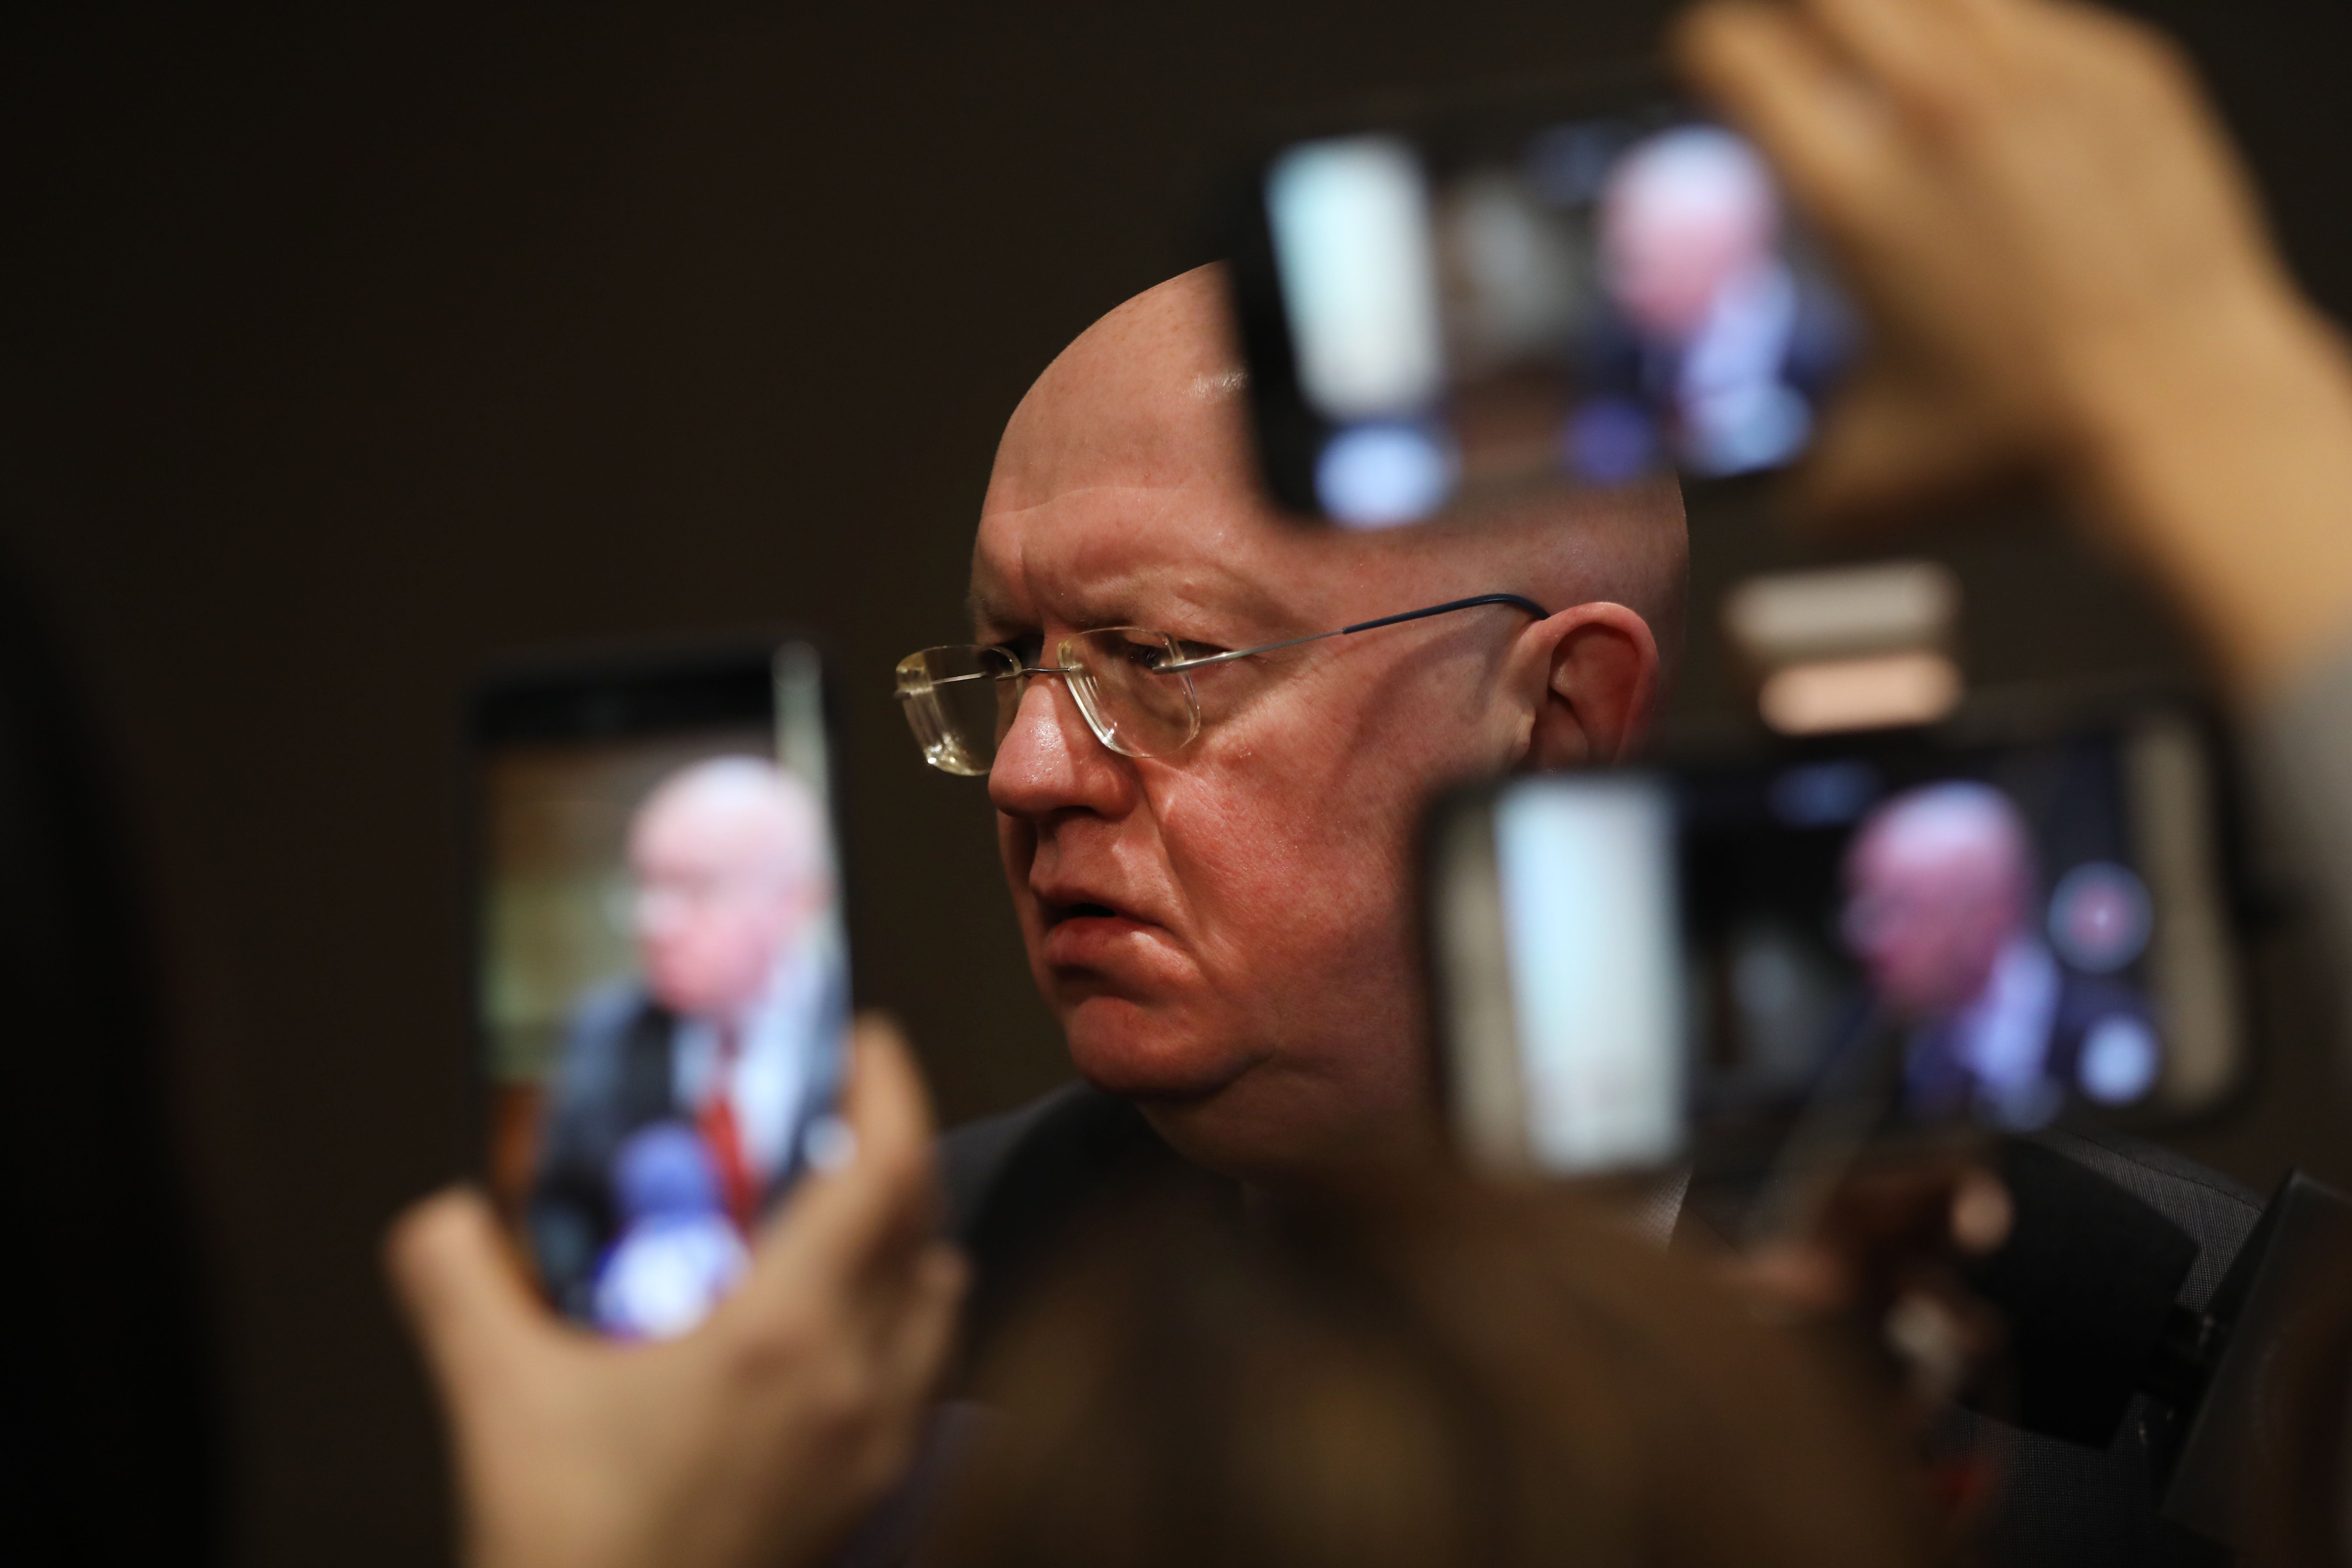 File: Russia's UN envoy Vassily Nebenzia speaks to the media following a UN Security Council meeting on Venezuela in January 2019 in New York